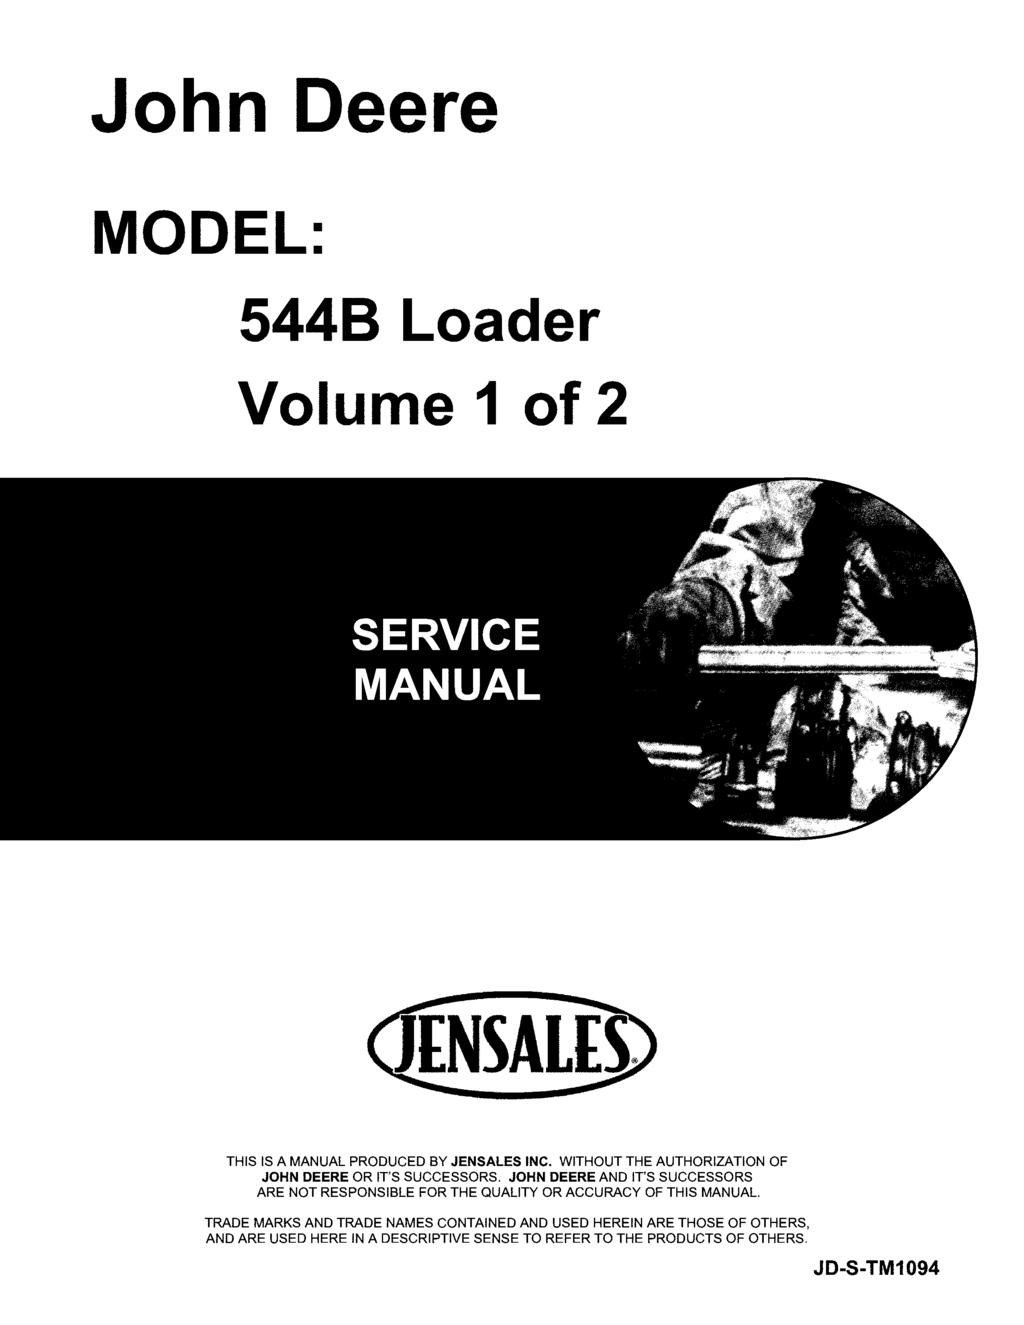 John Deere MODEL: 5448 Loader Volume 1 of 2 THIS IS A MANUAL PRODUCED BY JENSALES INC. WITHOUT THE AUTHORIZATION OF JOHN DEERE OR IT'S SUCCESSORS.